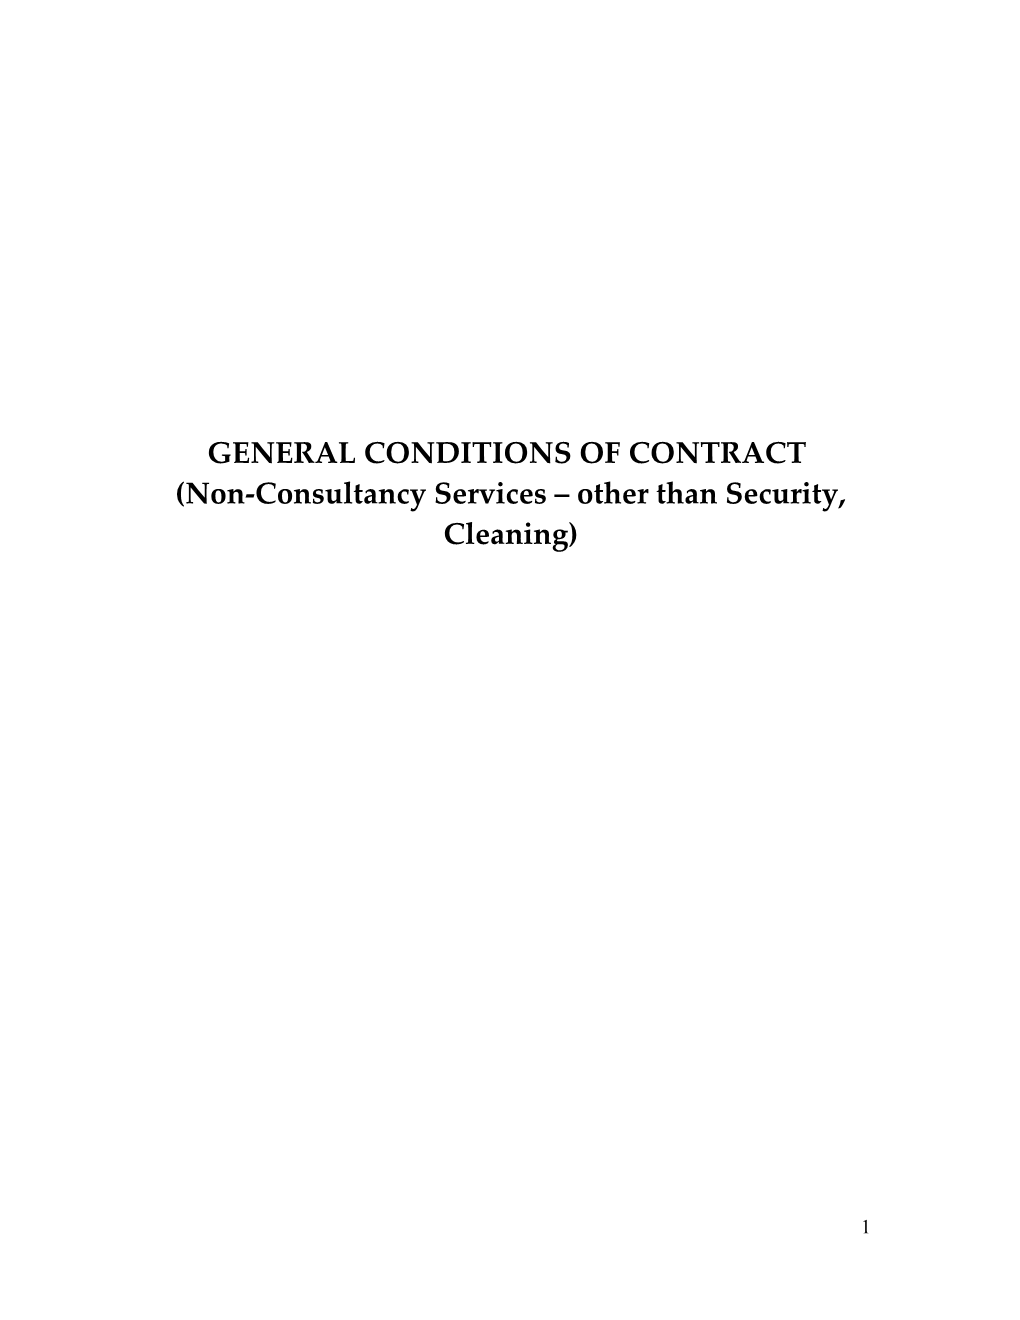 GENERAL CONDITIONS of CONTRACT (Non-Consultancy Services Other Than Security, Cleaning)